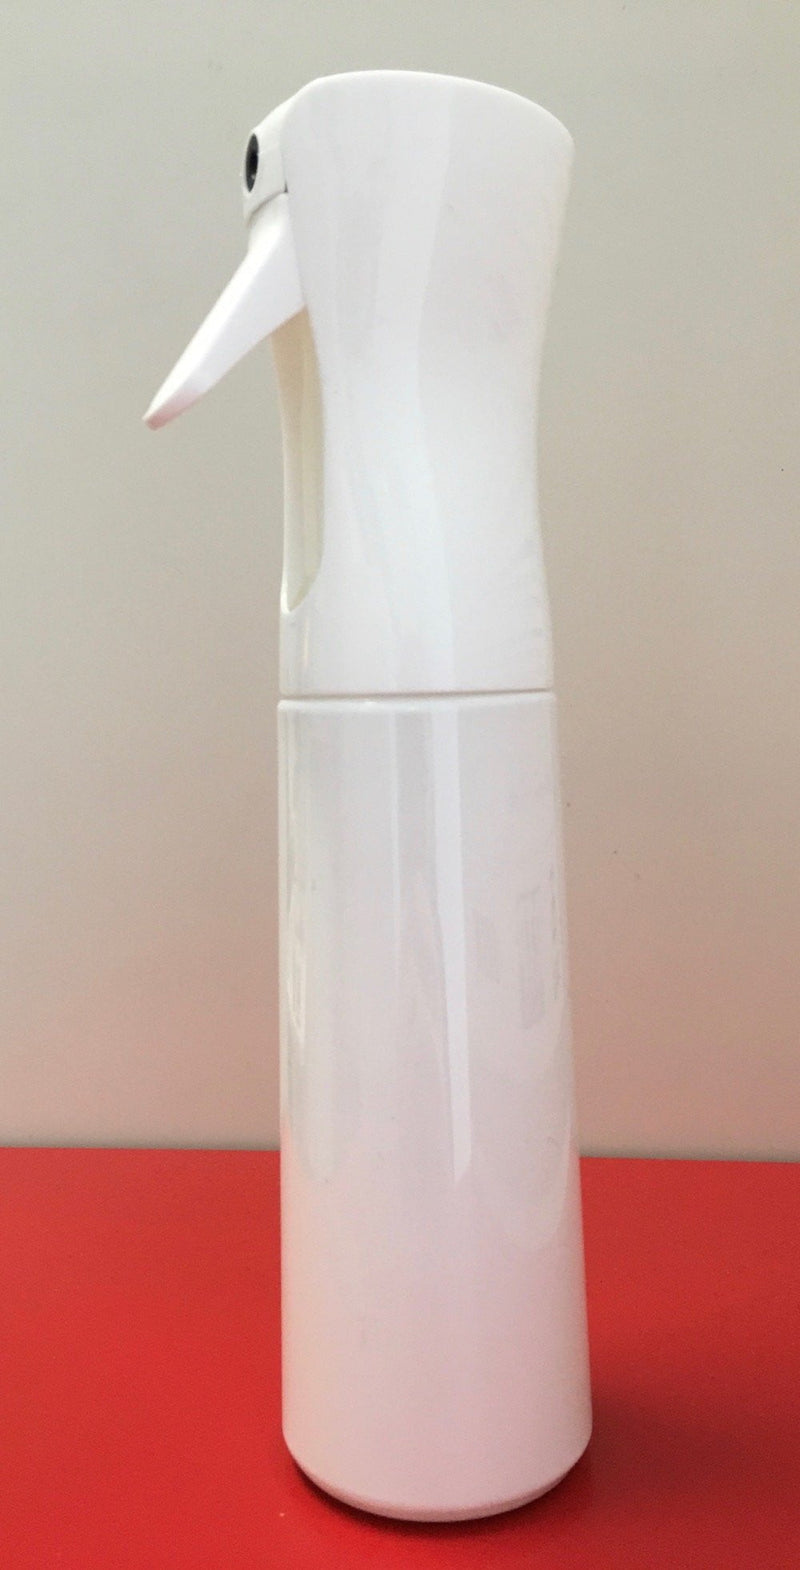 Hand Spray Bottle for Pretreating 300ml - Machines Plus